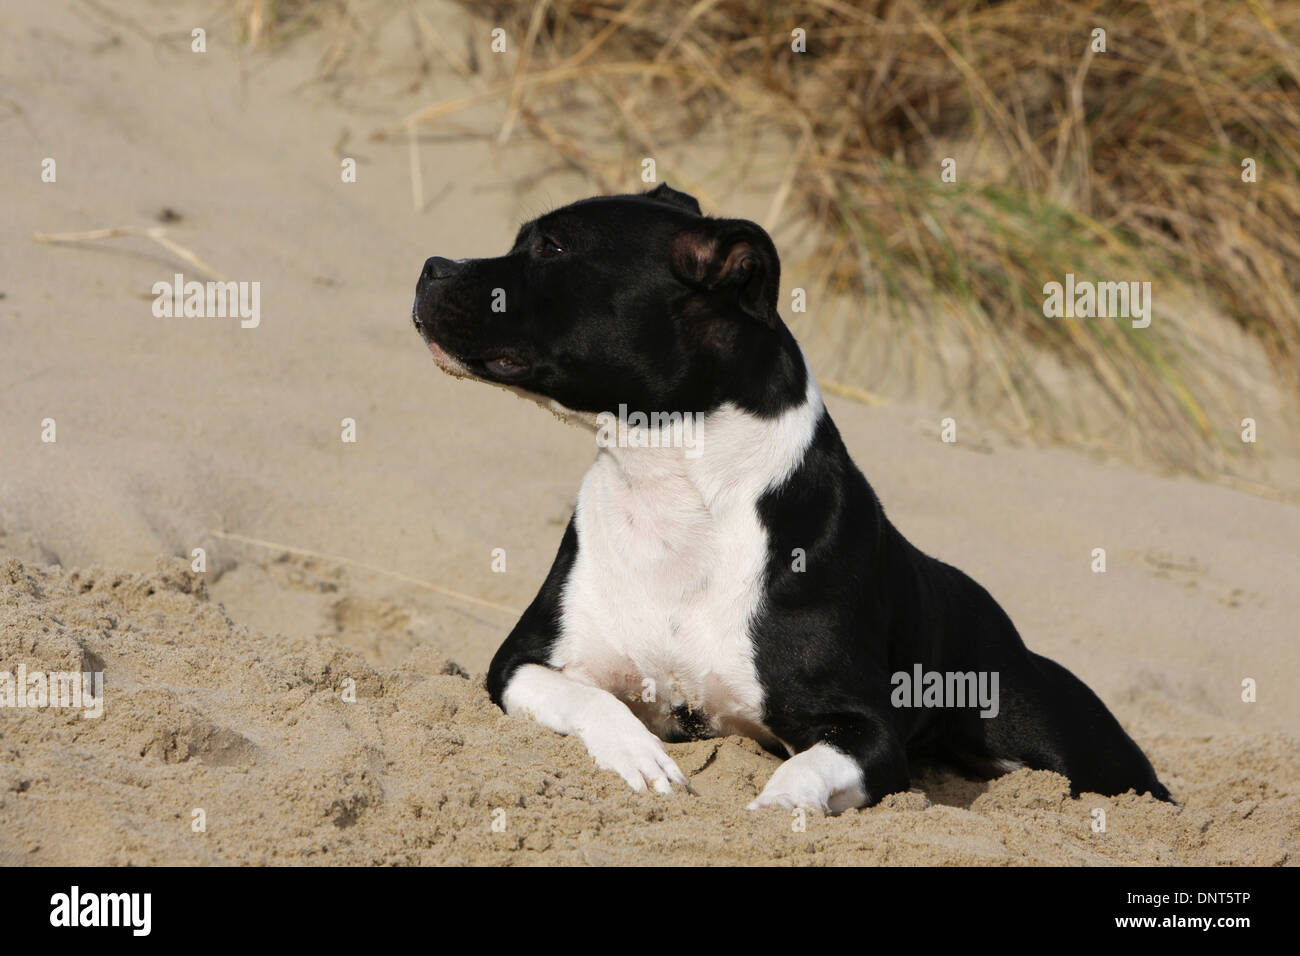 dog Staffordshire Bull Terrier / Staffie  adult lying on the sand Stock Photo